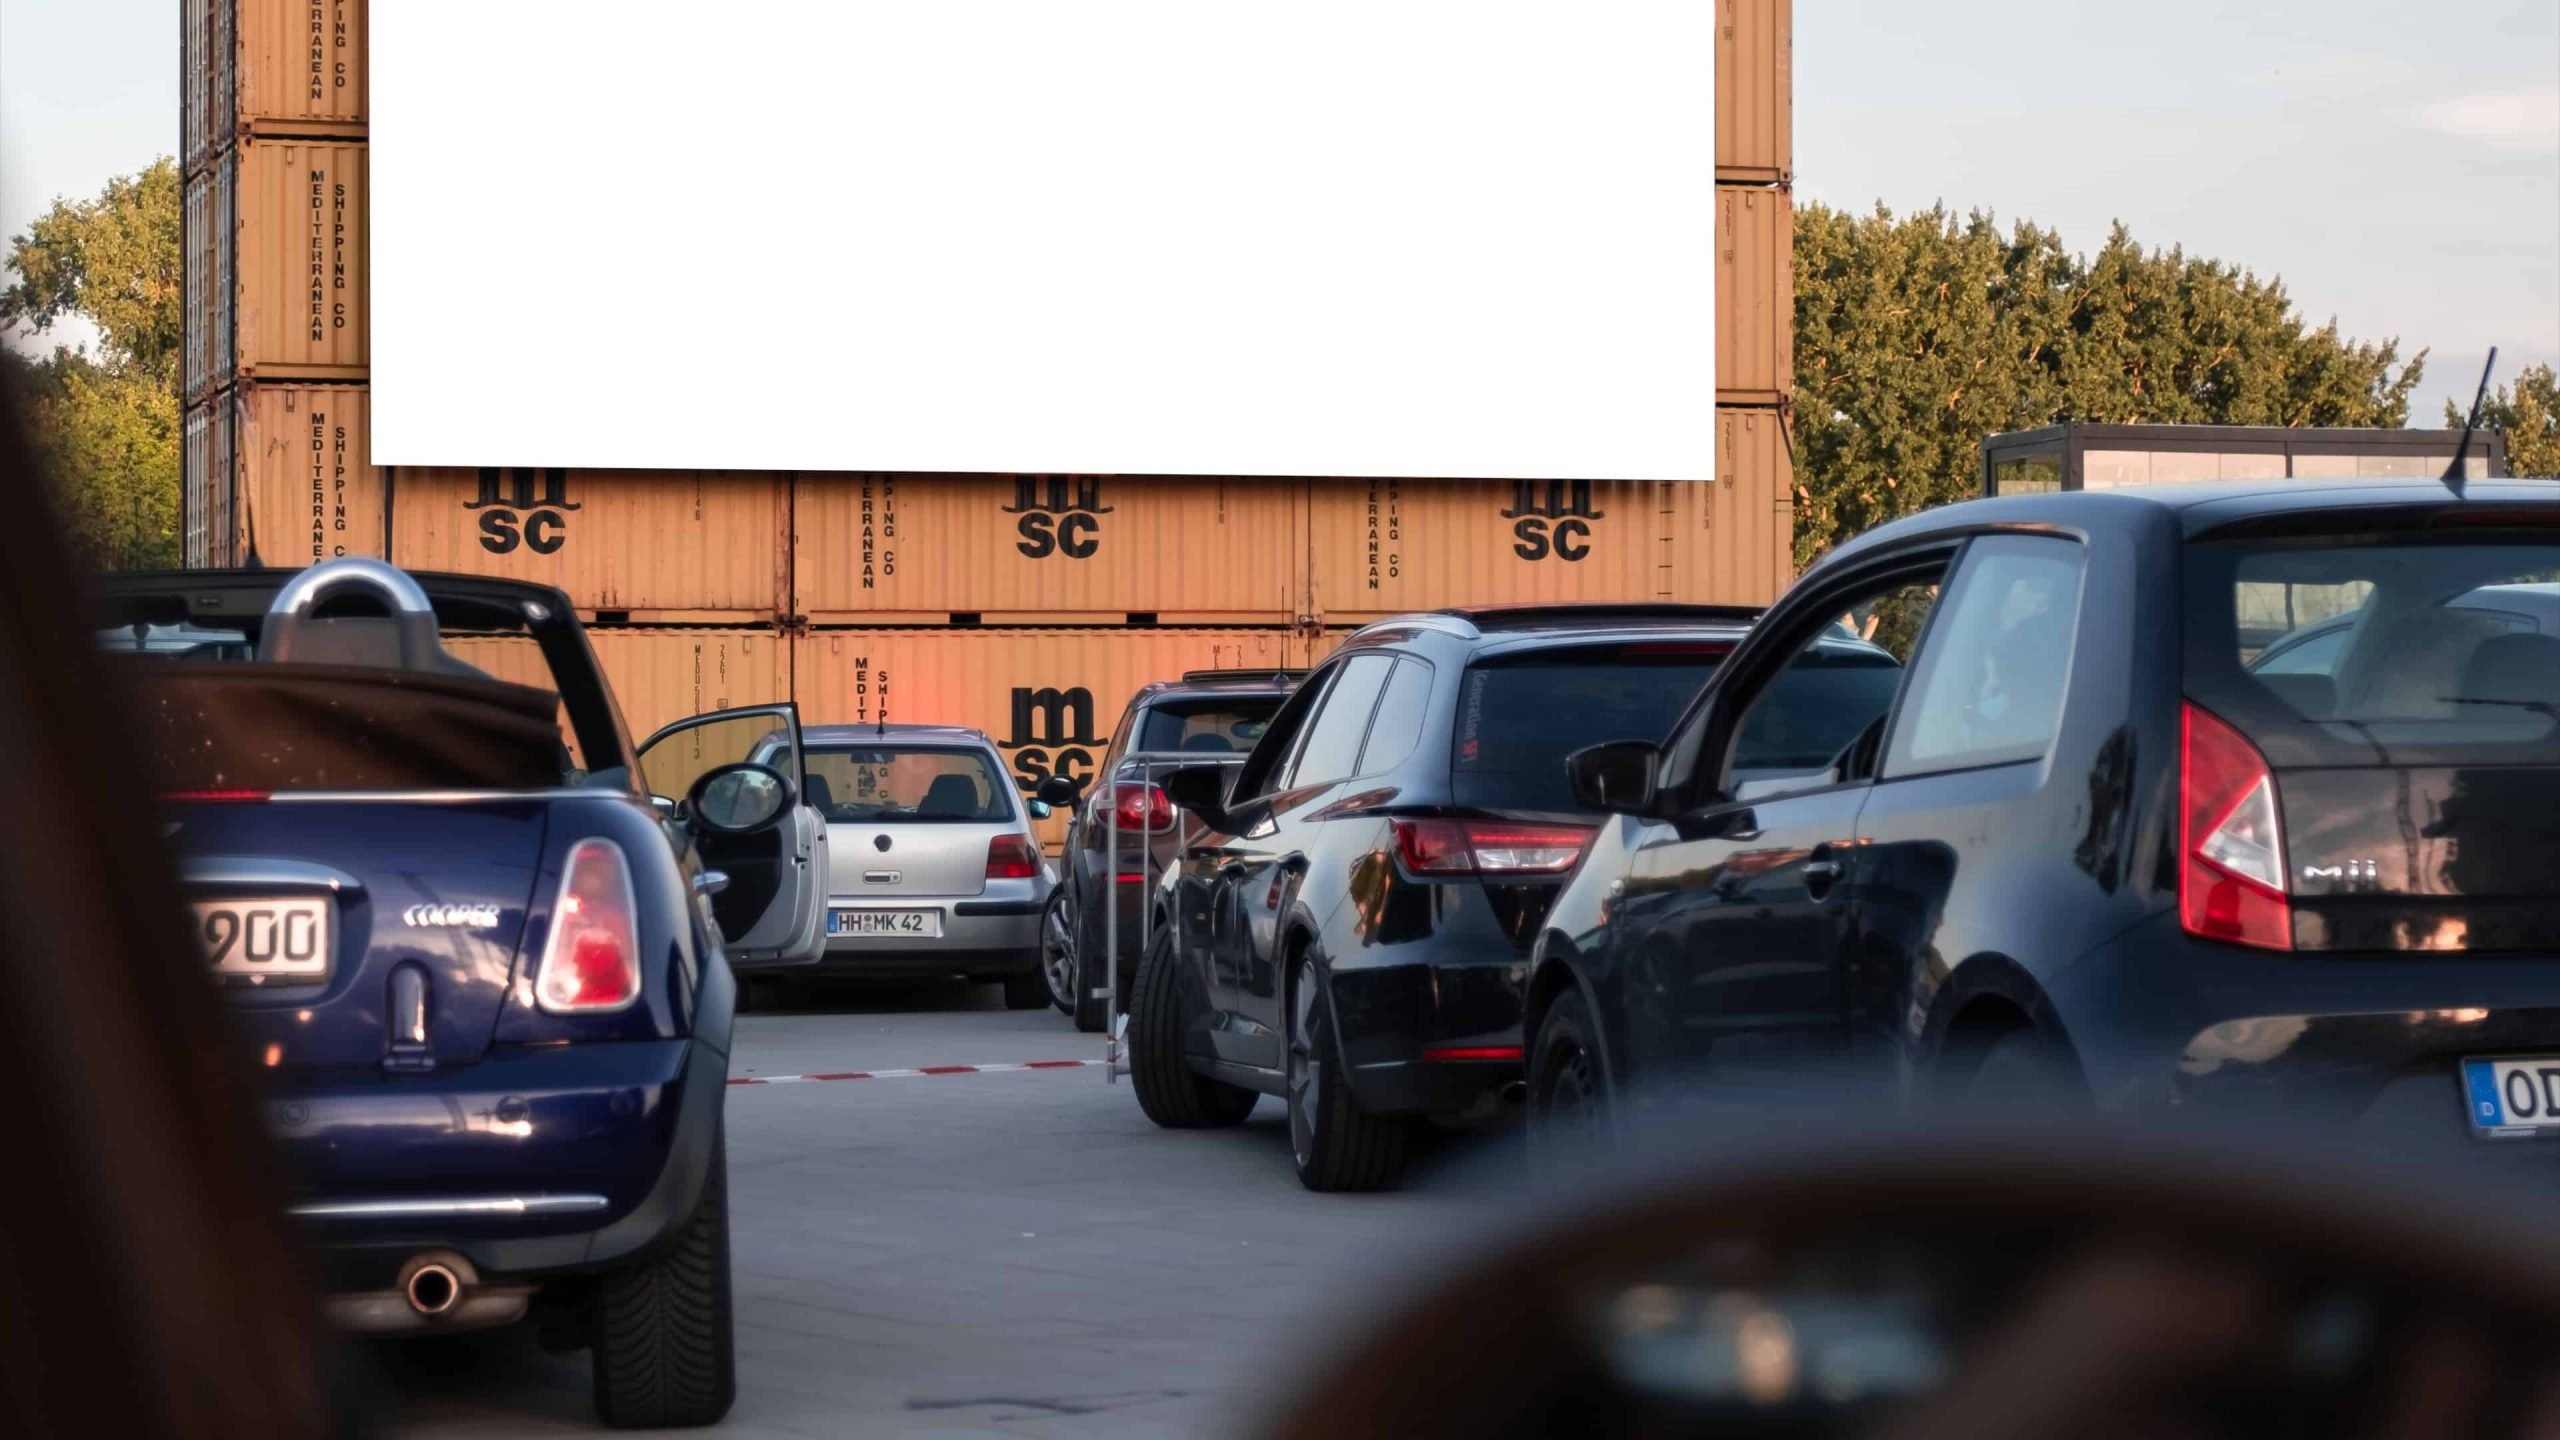 World Club Dome to bring drive-in event to Las Vegas